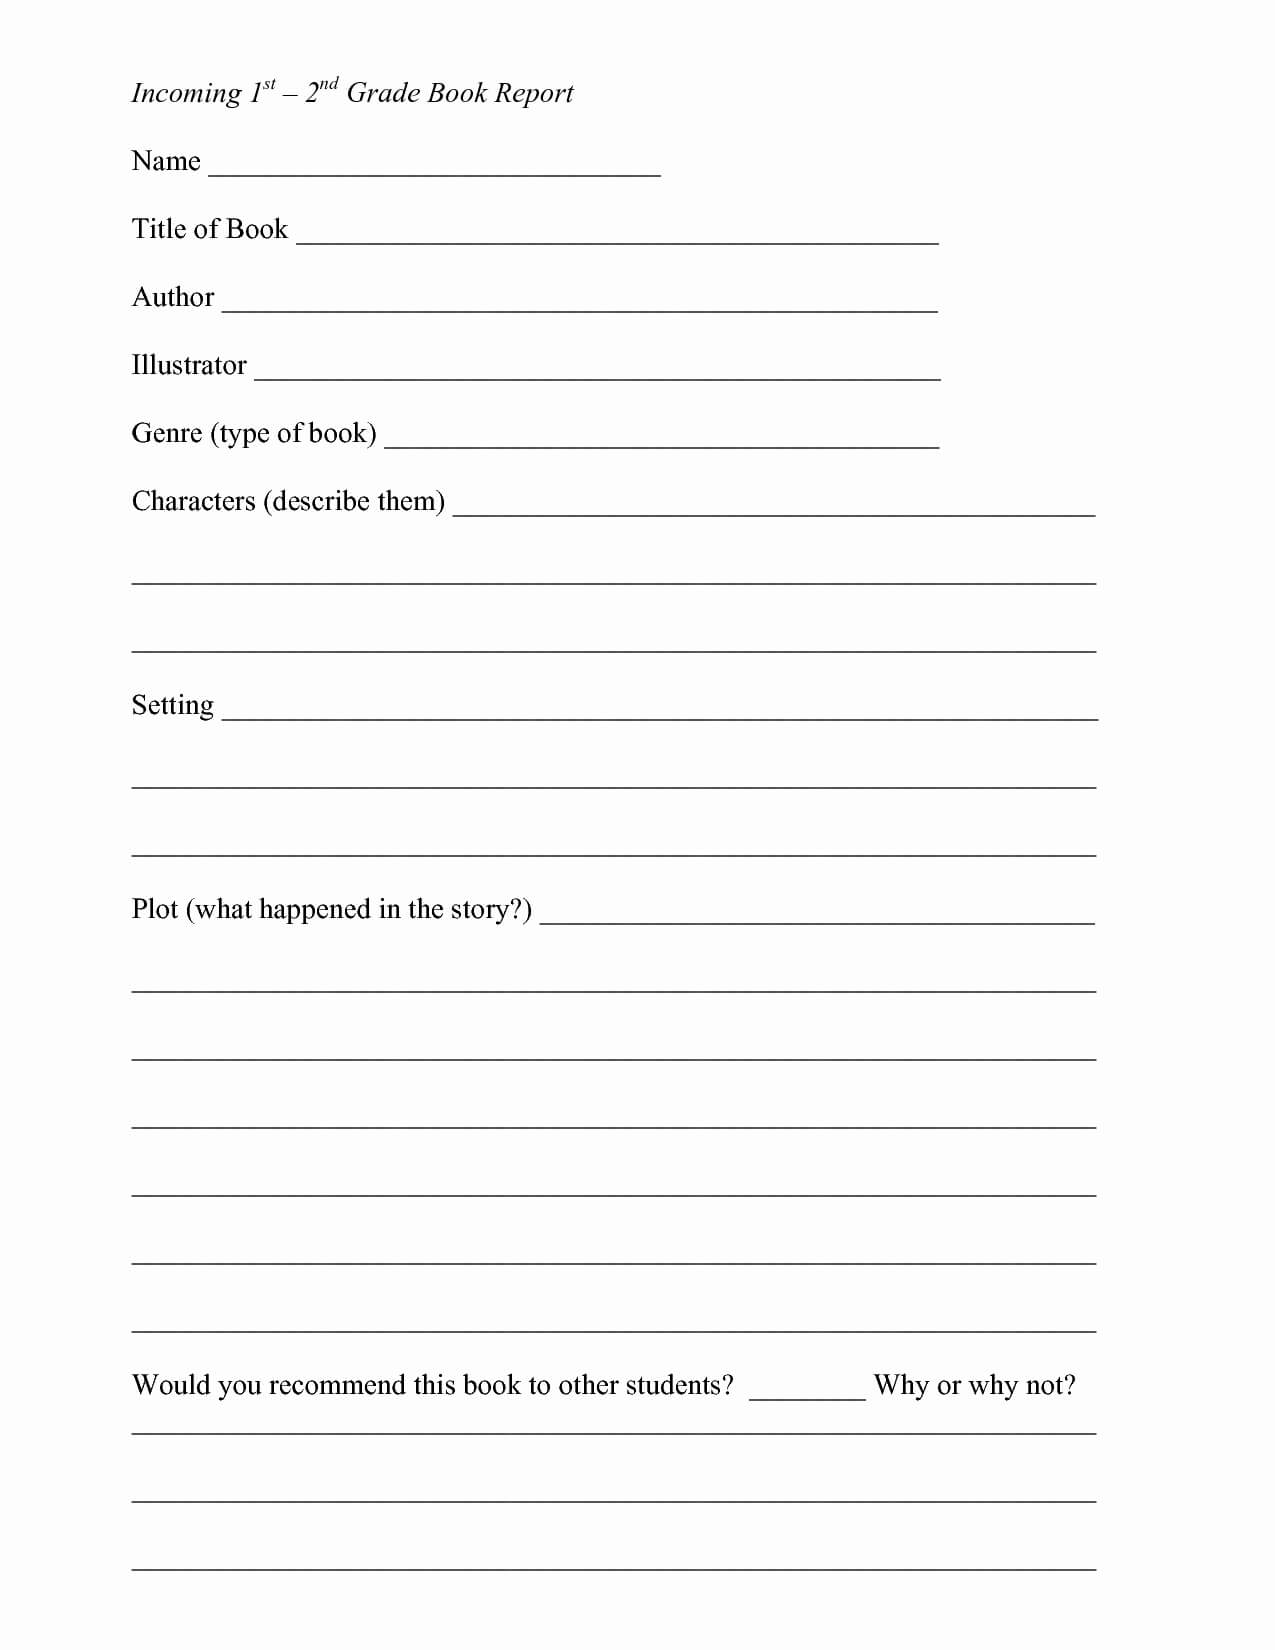 10+ Book Report Templates | 2Phost With Second Grade Book Report Template